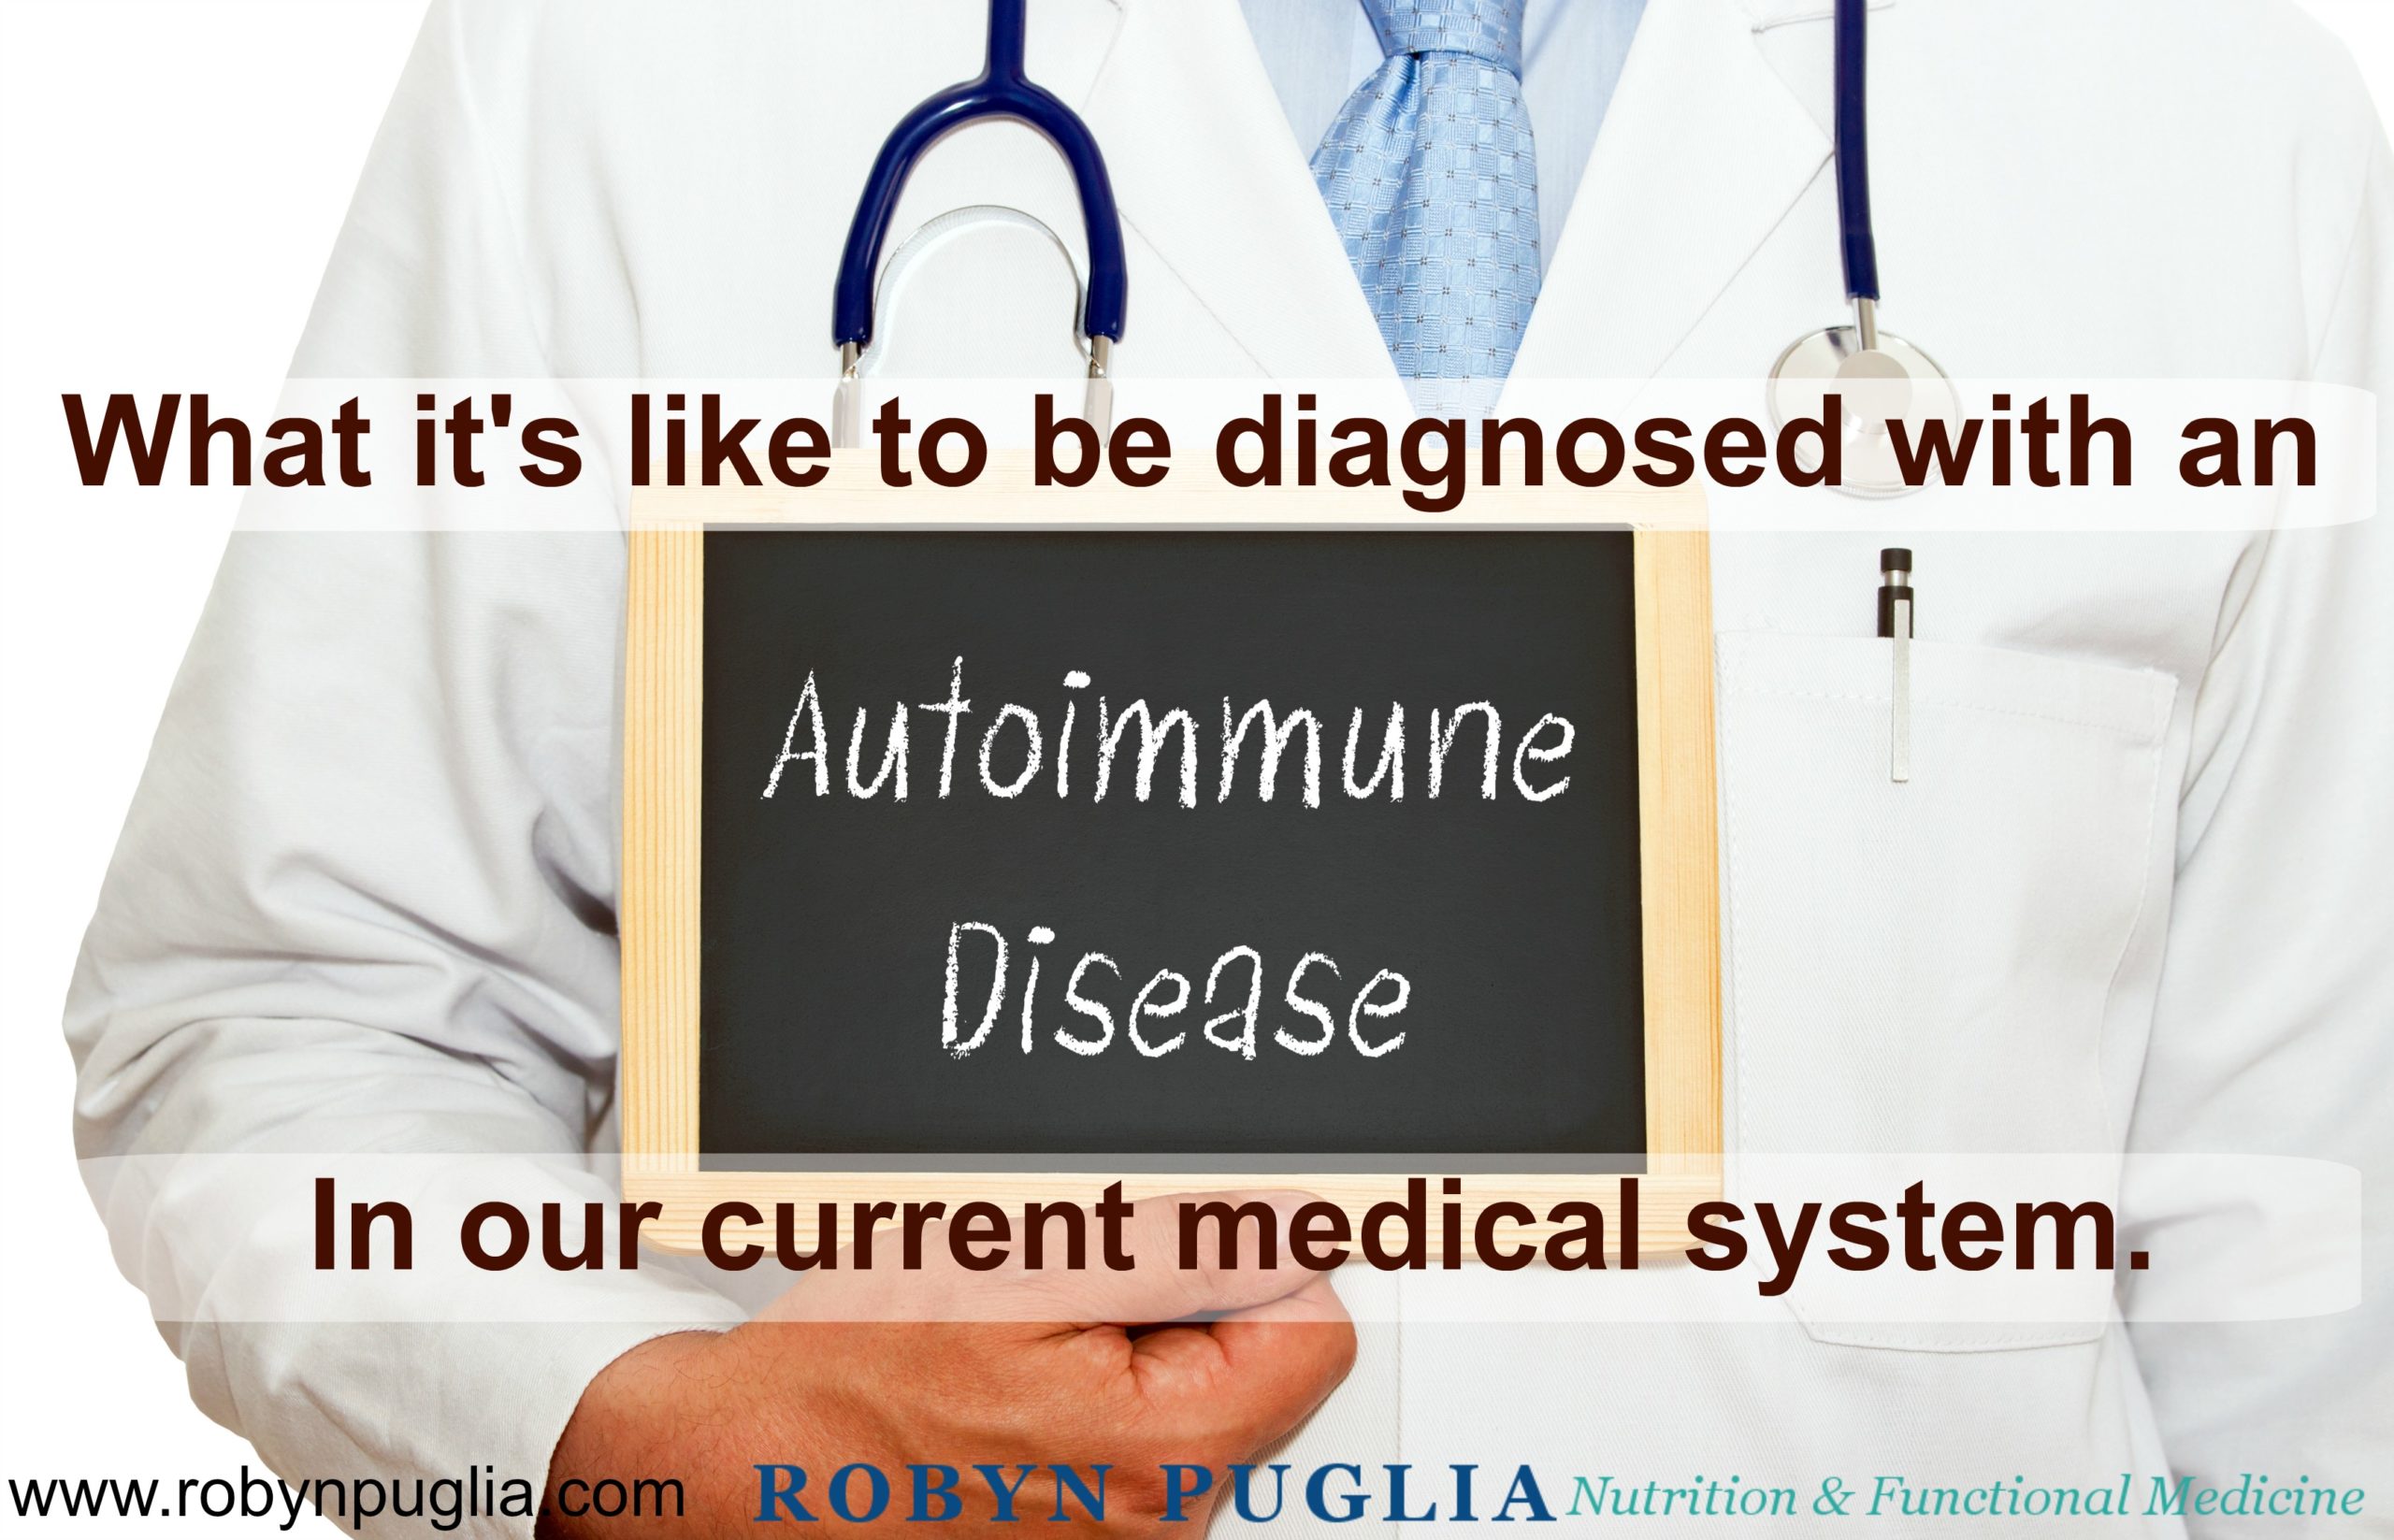 Autoimmune disease and the current medical system